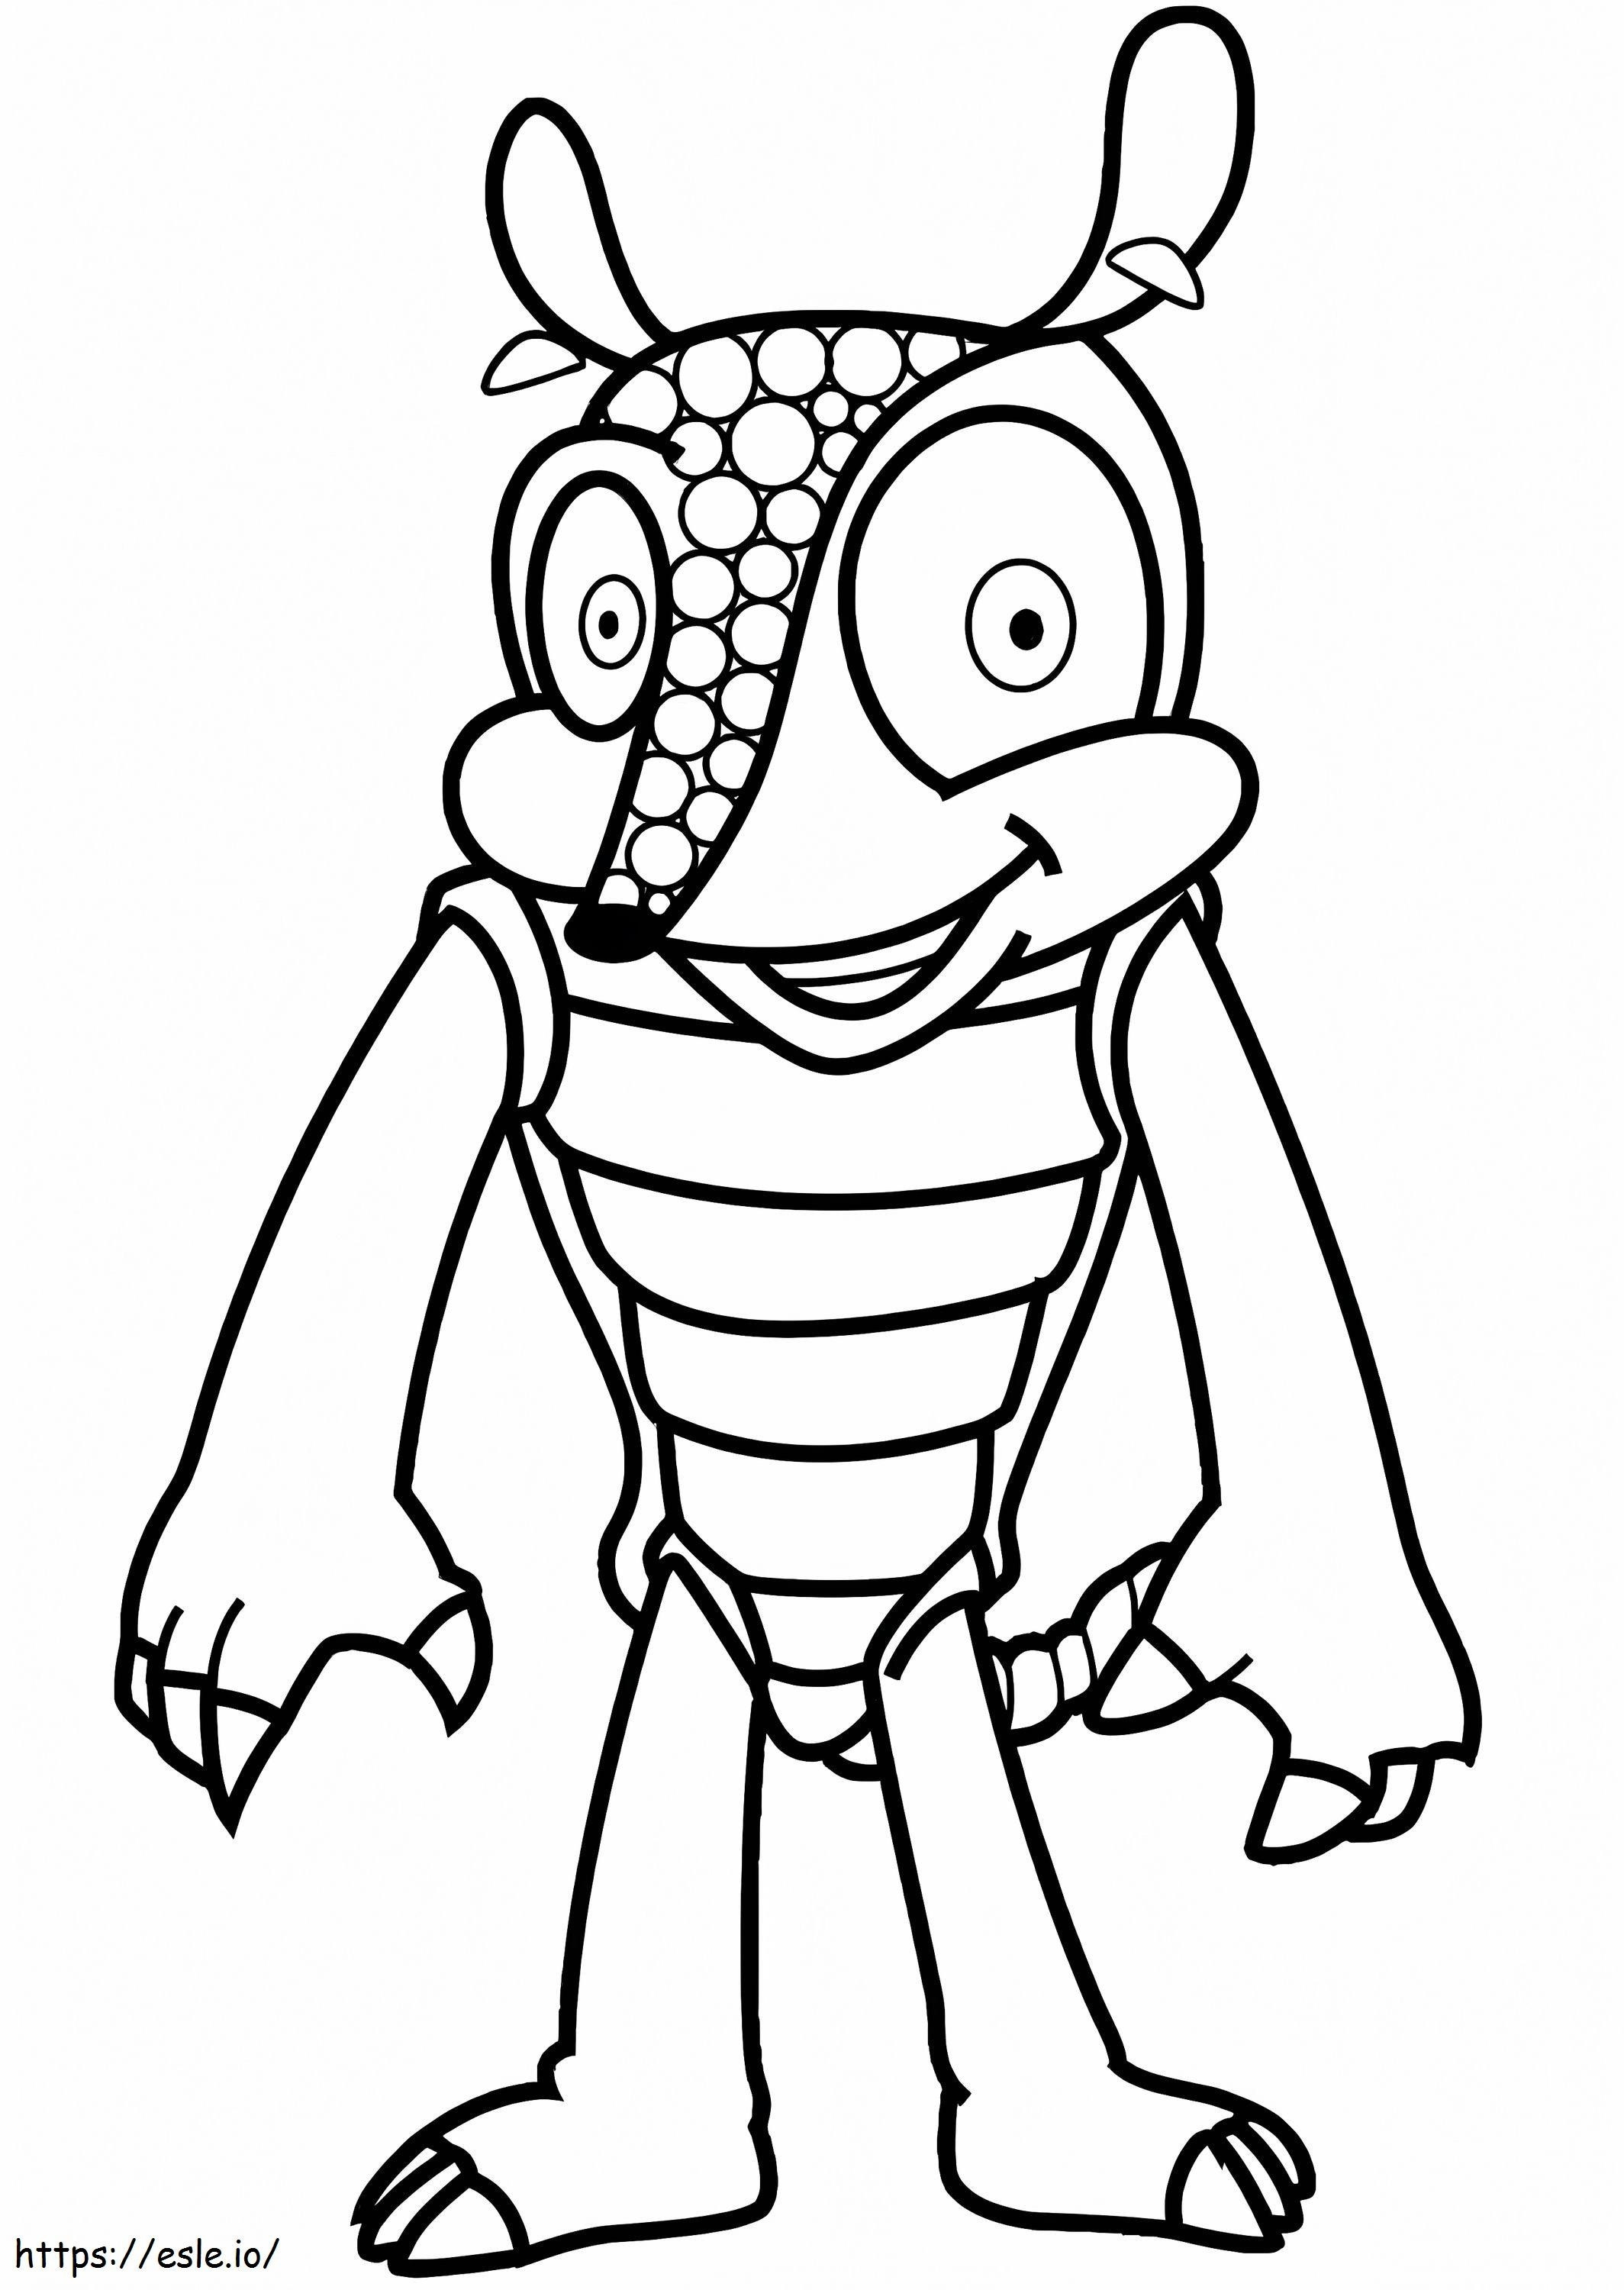 Standing Armadillo Smiling coloring page